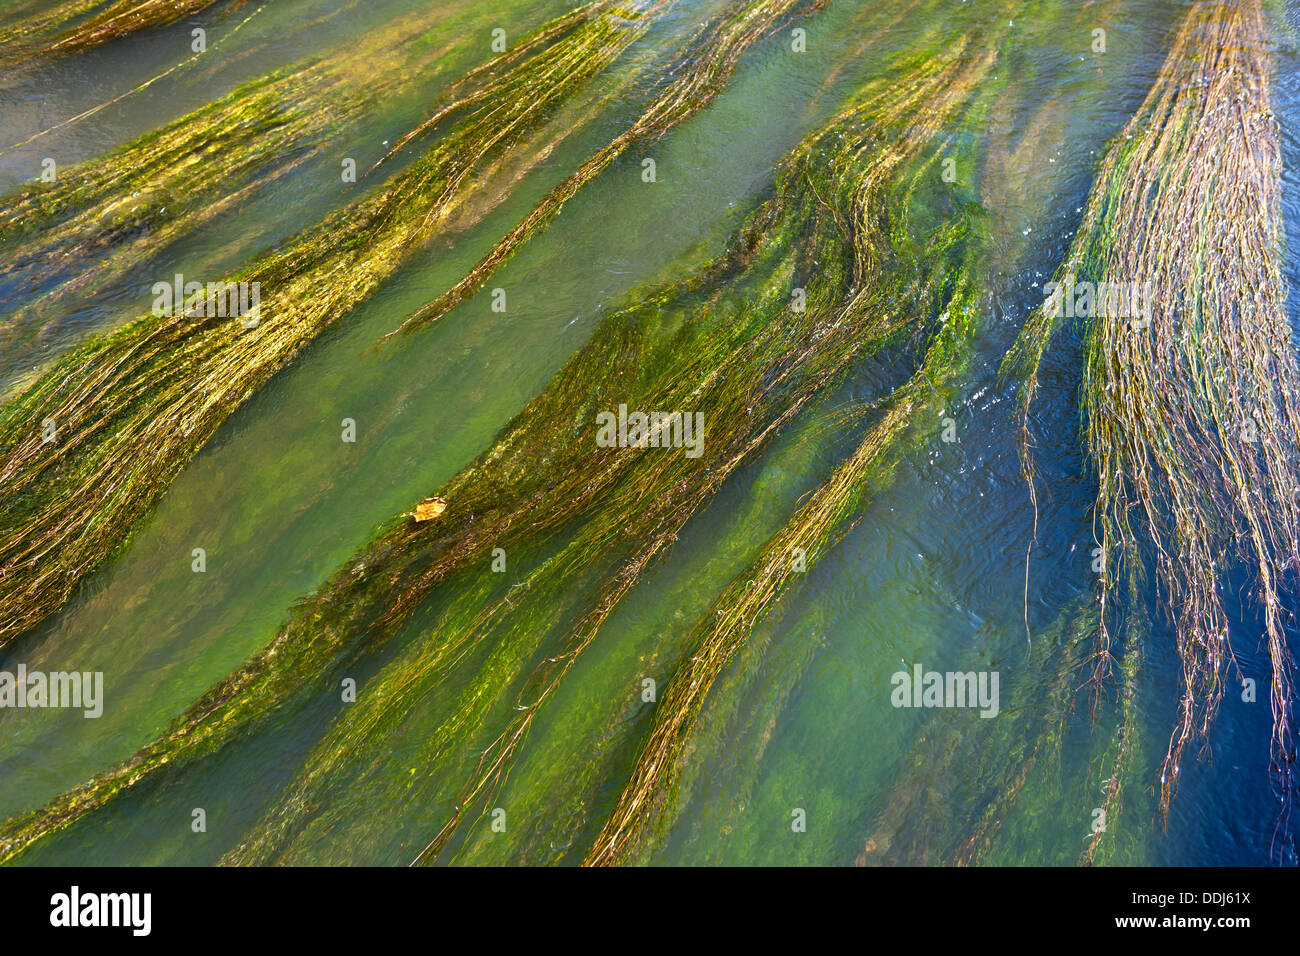 Germany, Hesse,  Stream with water plants and grass Stock Photo